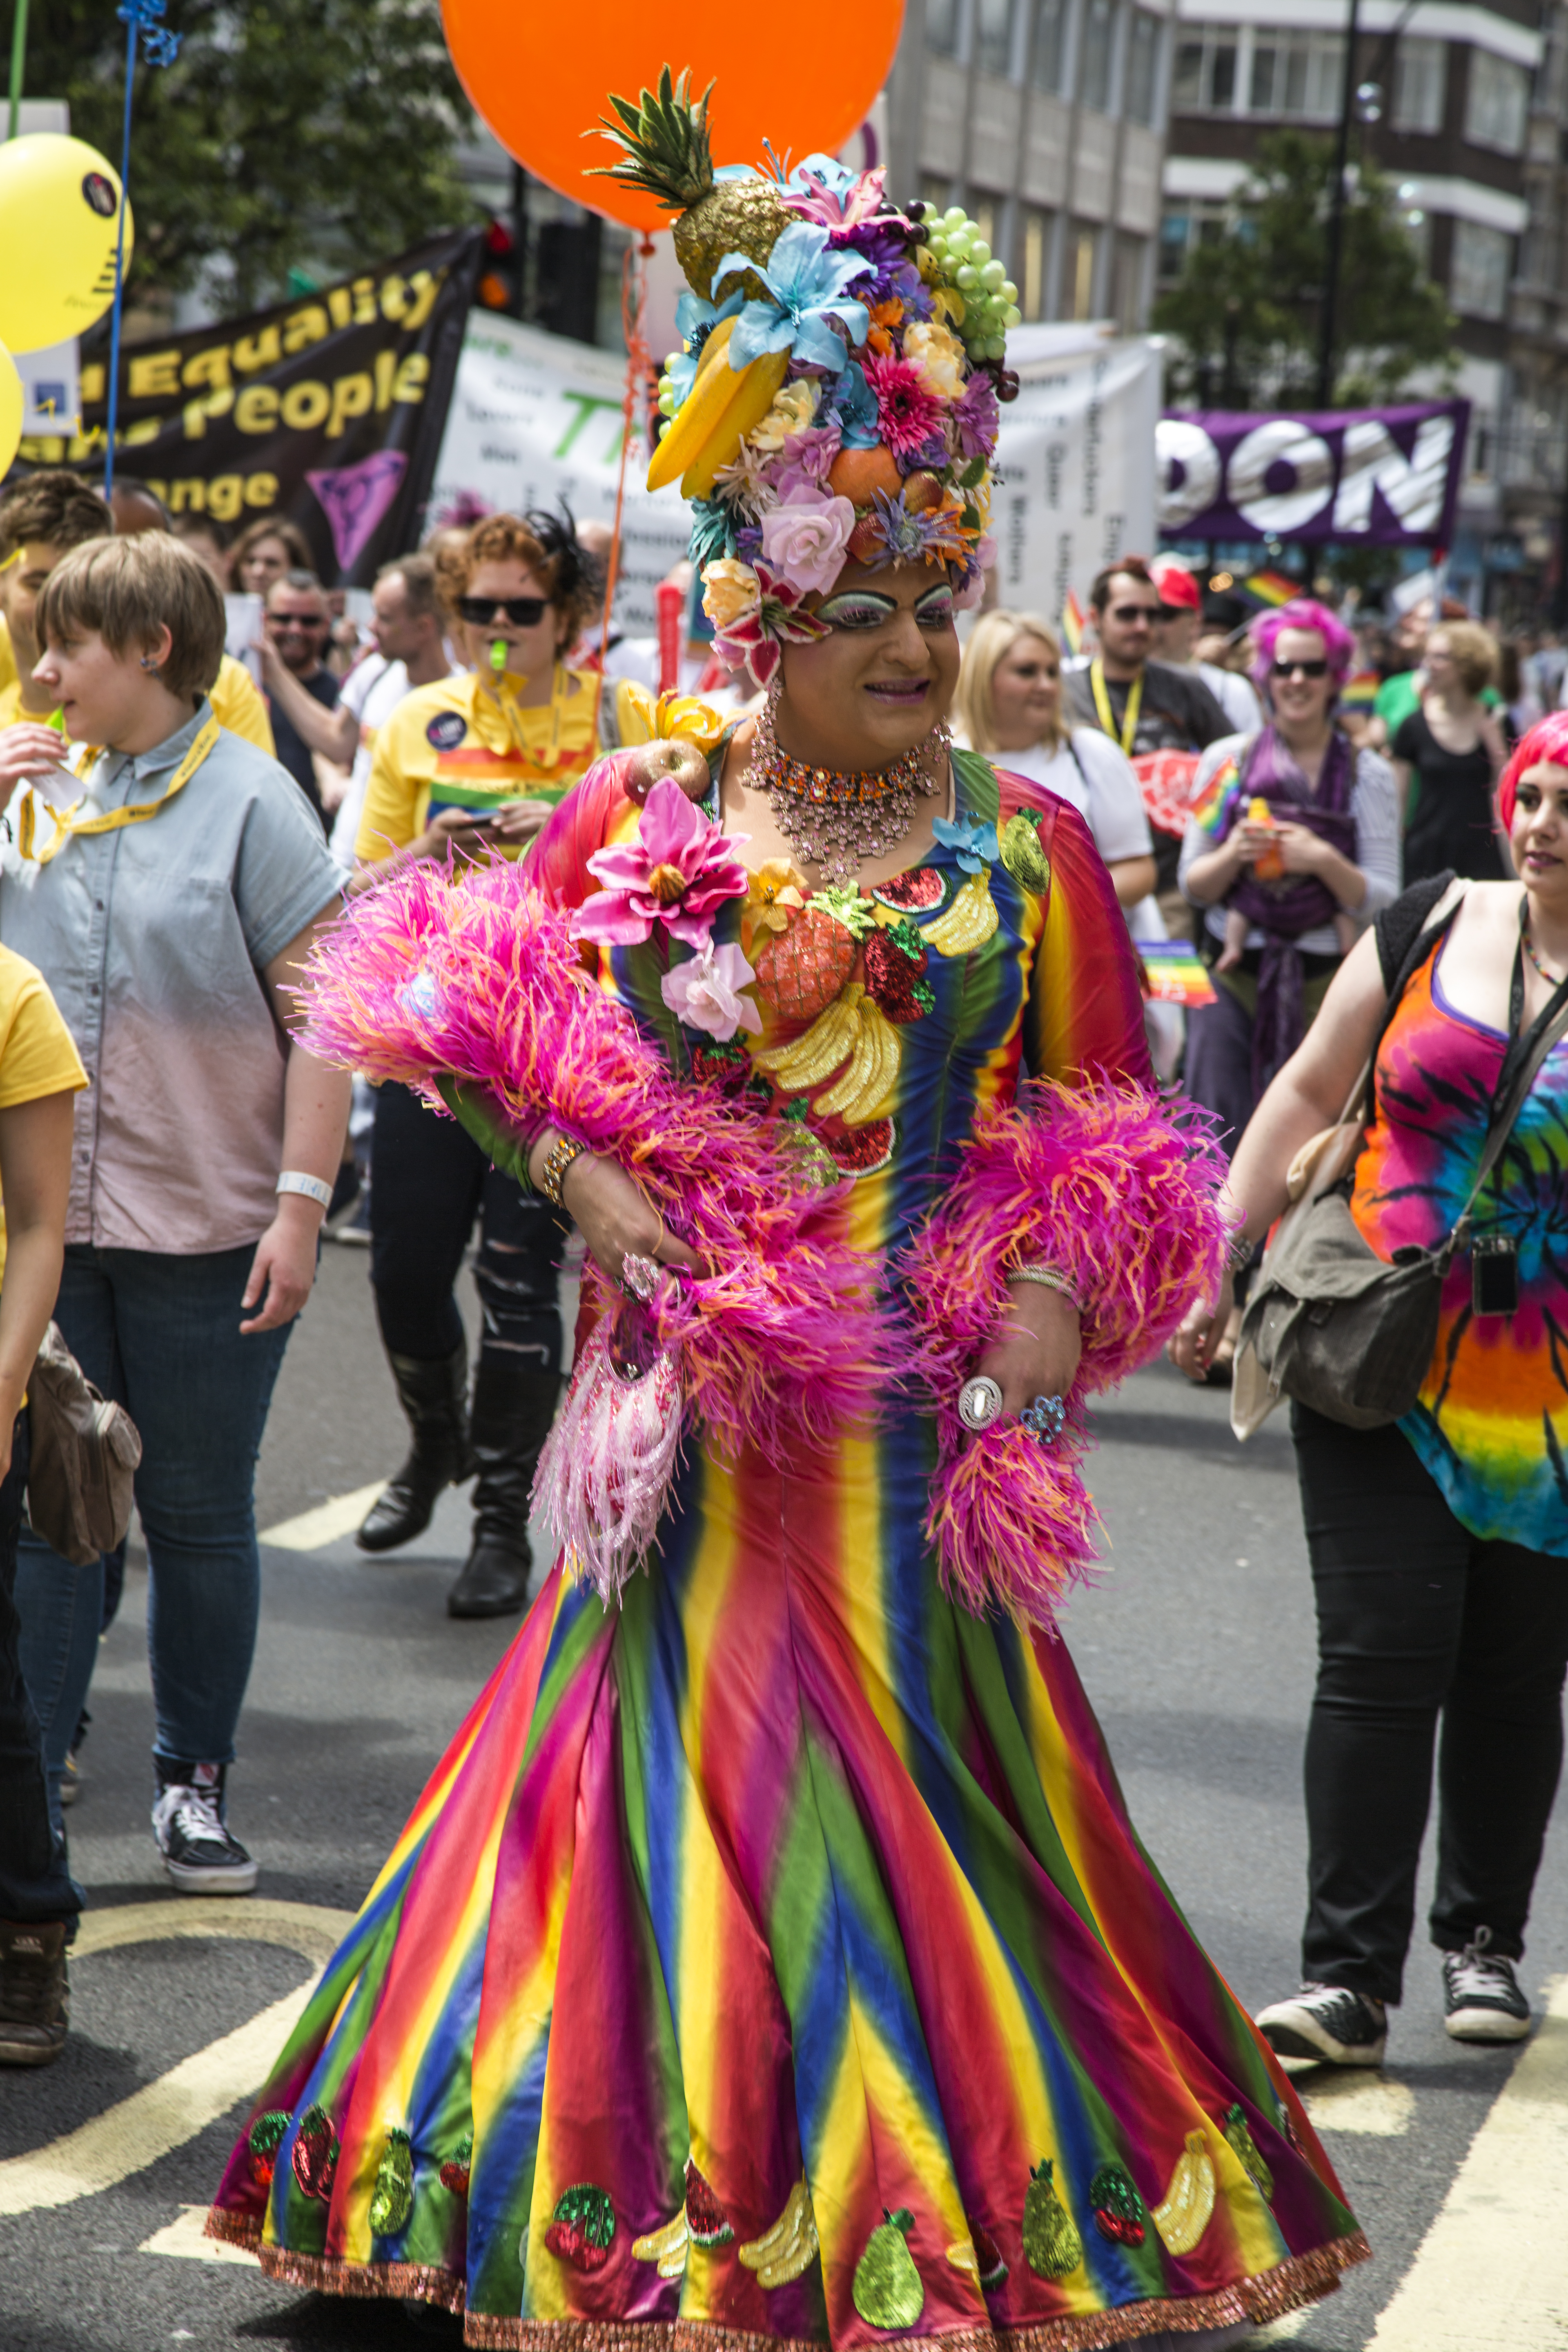 London, United Kingdom - June 29, 2013: A reveller at London Gay Pride 2013 Parade who is dressed in drag with a rainbow coloured dress and a headdress containing tropical fruit